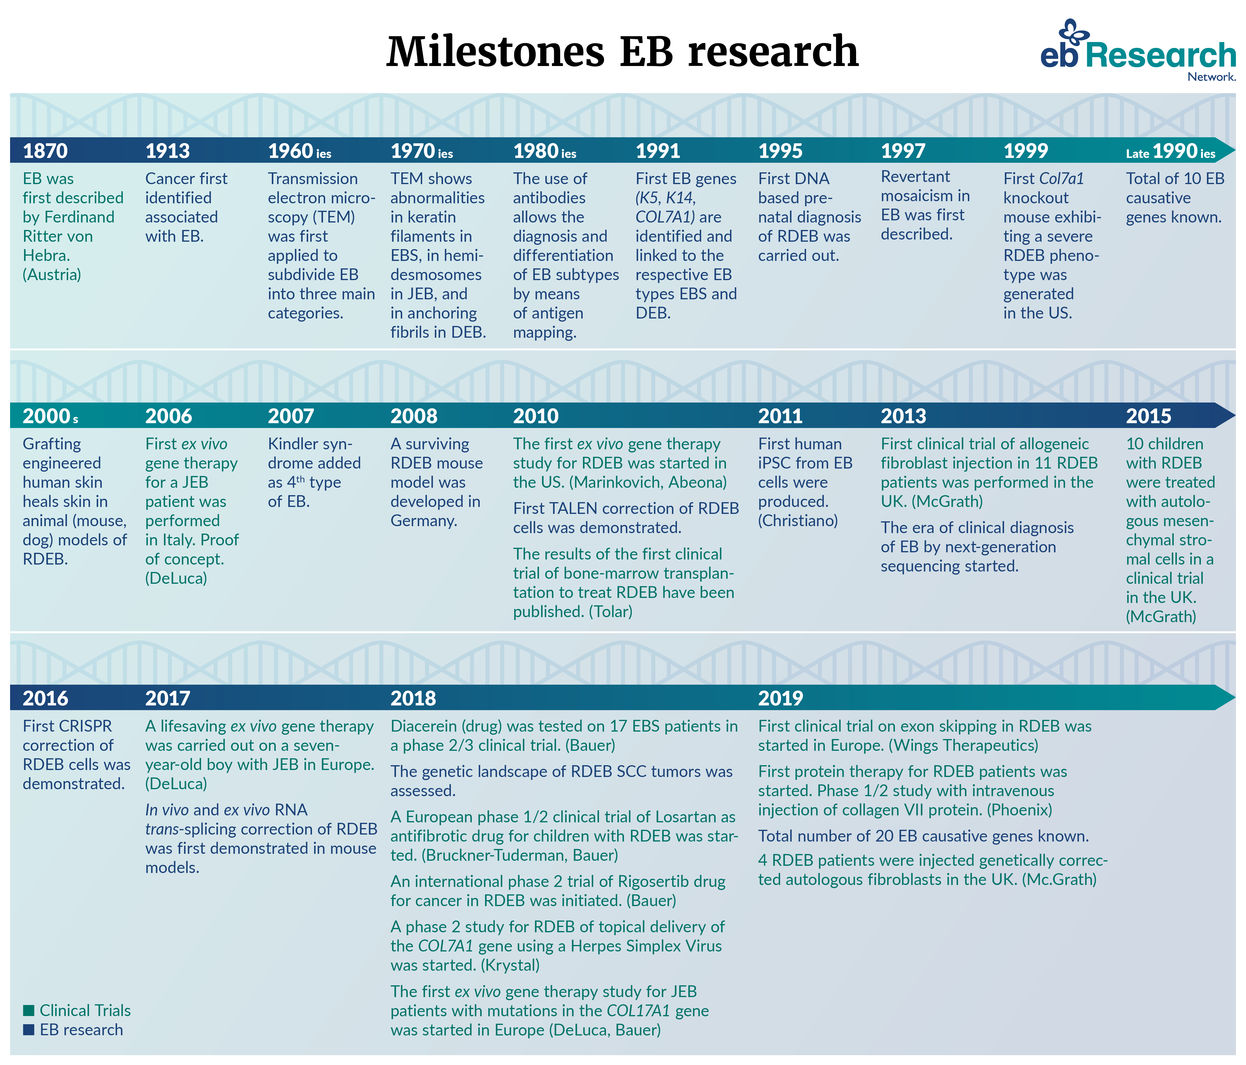 Milestones of EB research and clinical trials as a timeline